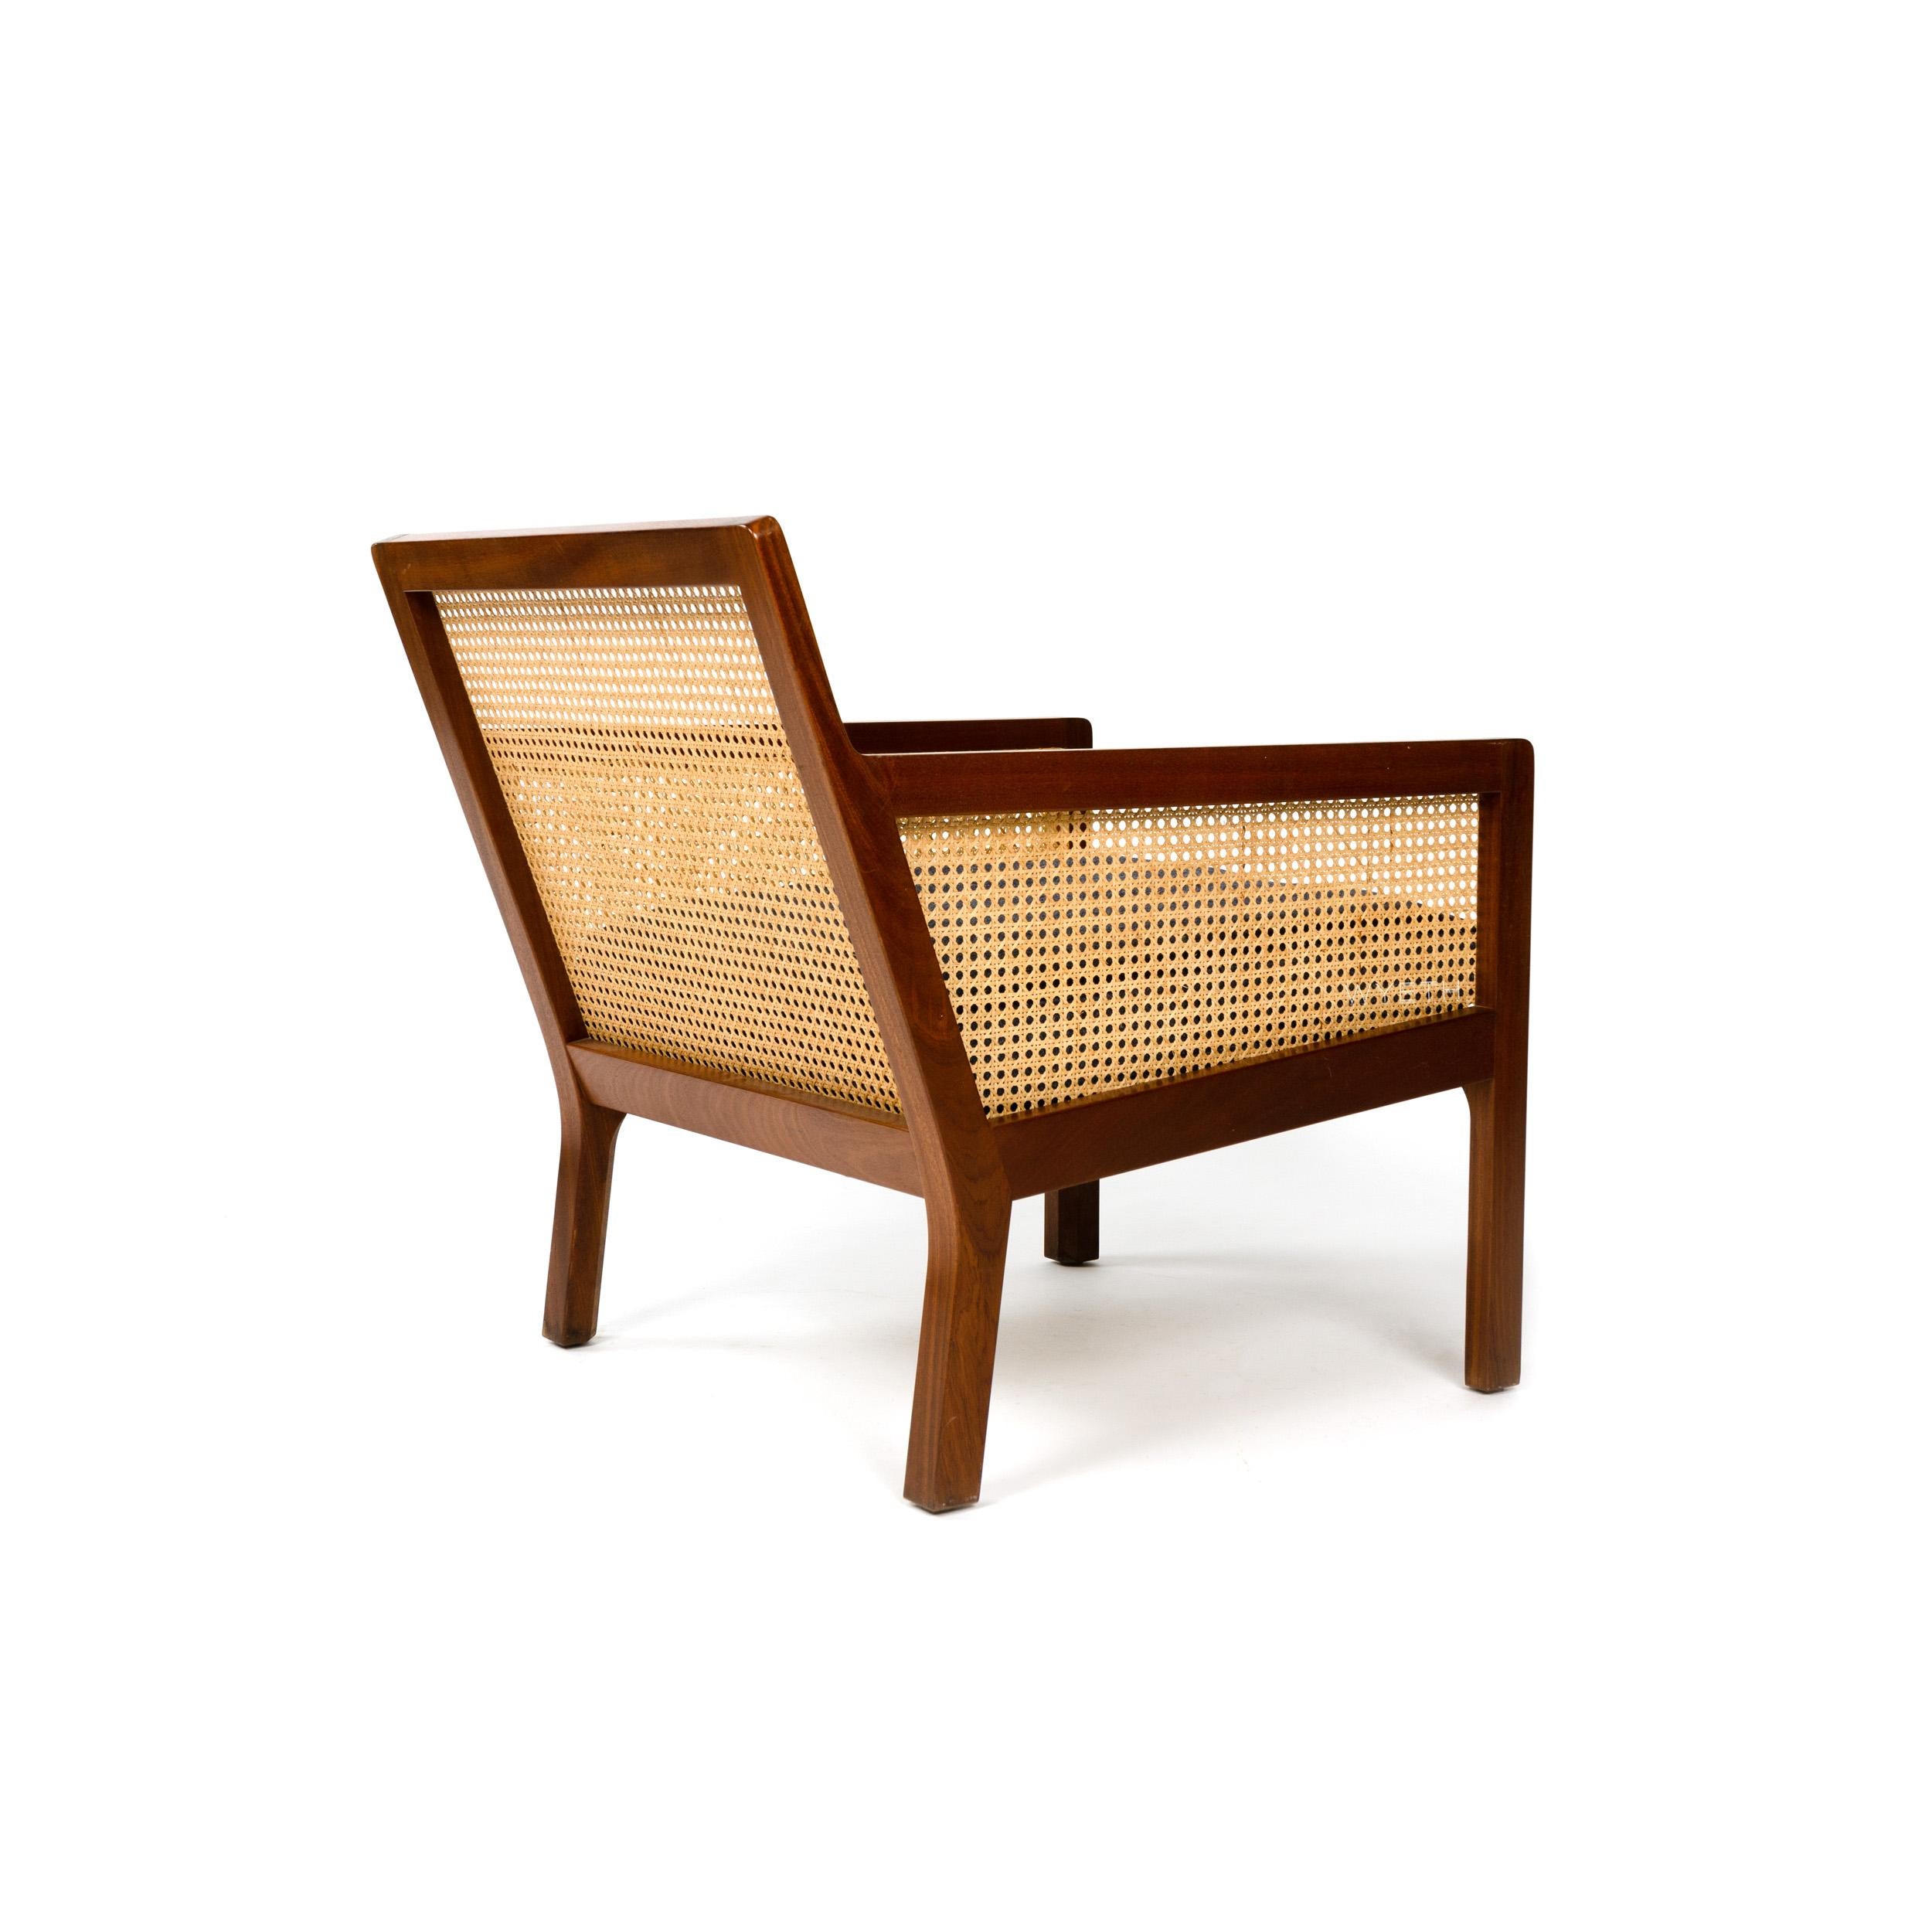 Danish 1960s Mahogany & Cane Lounge Chair by Bernt Petersen for Worts Mobelsnedkeri For Sale